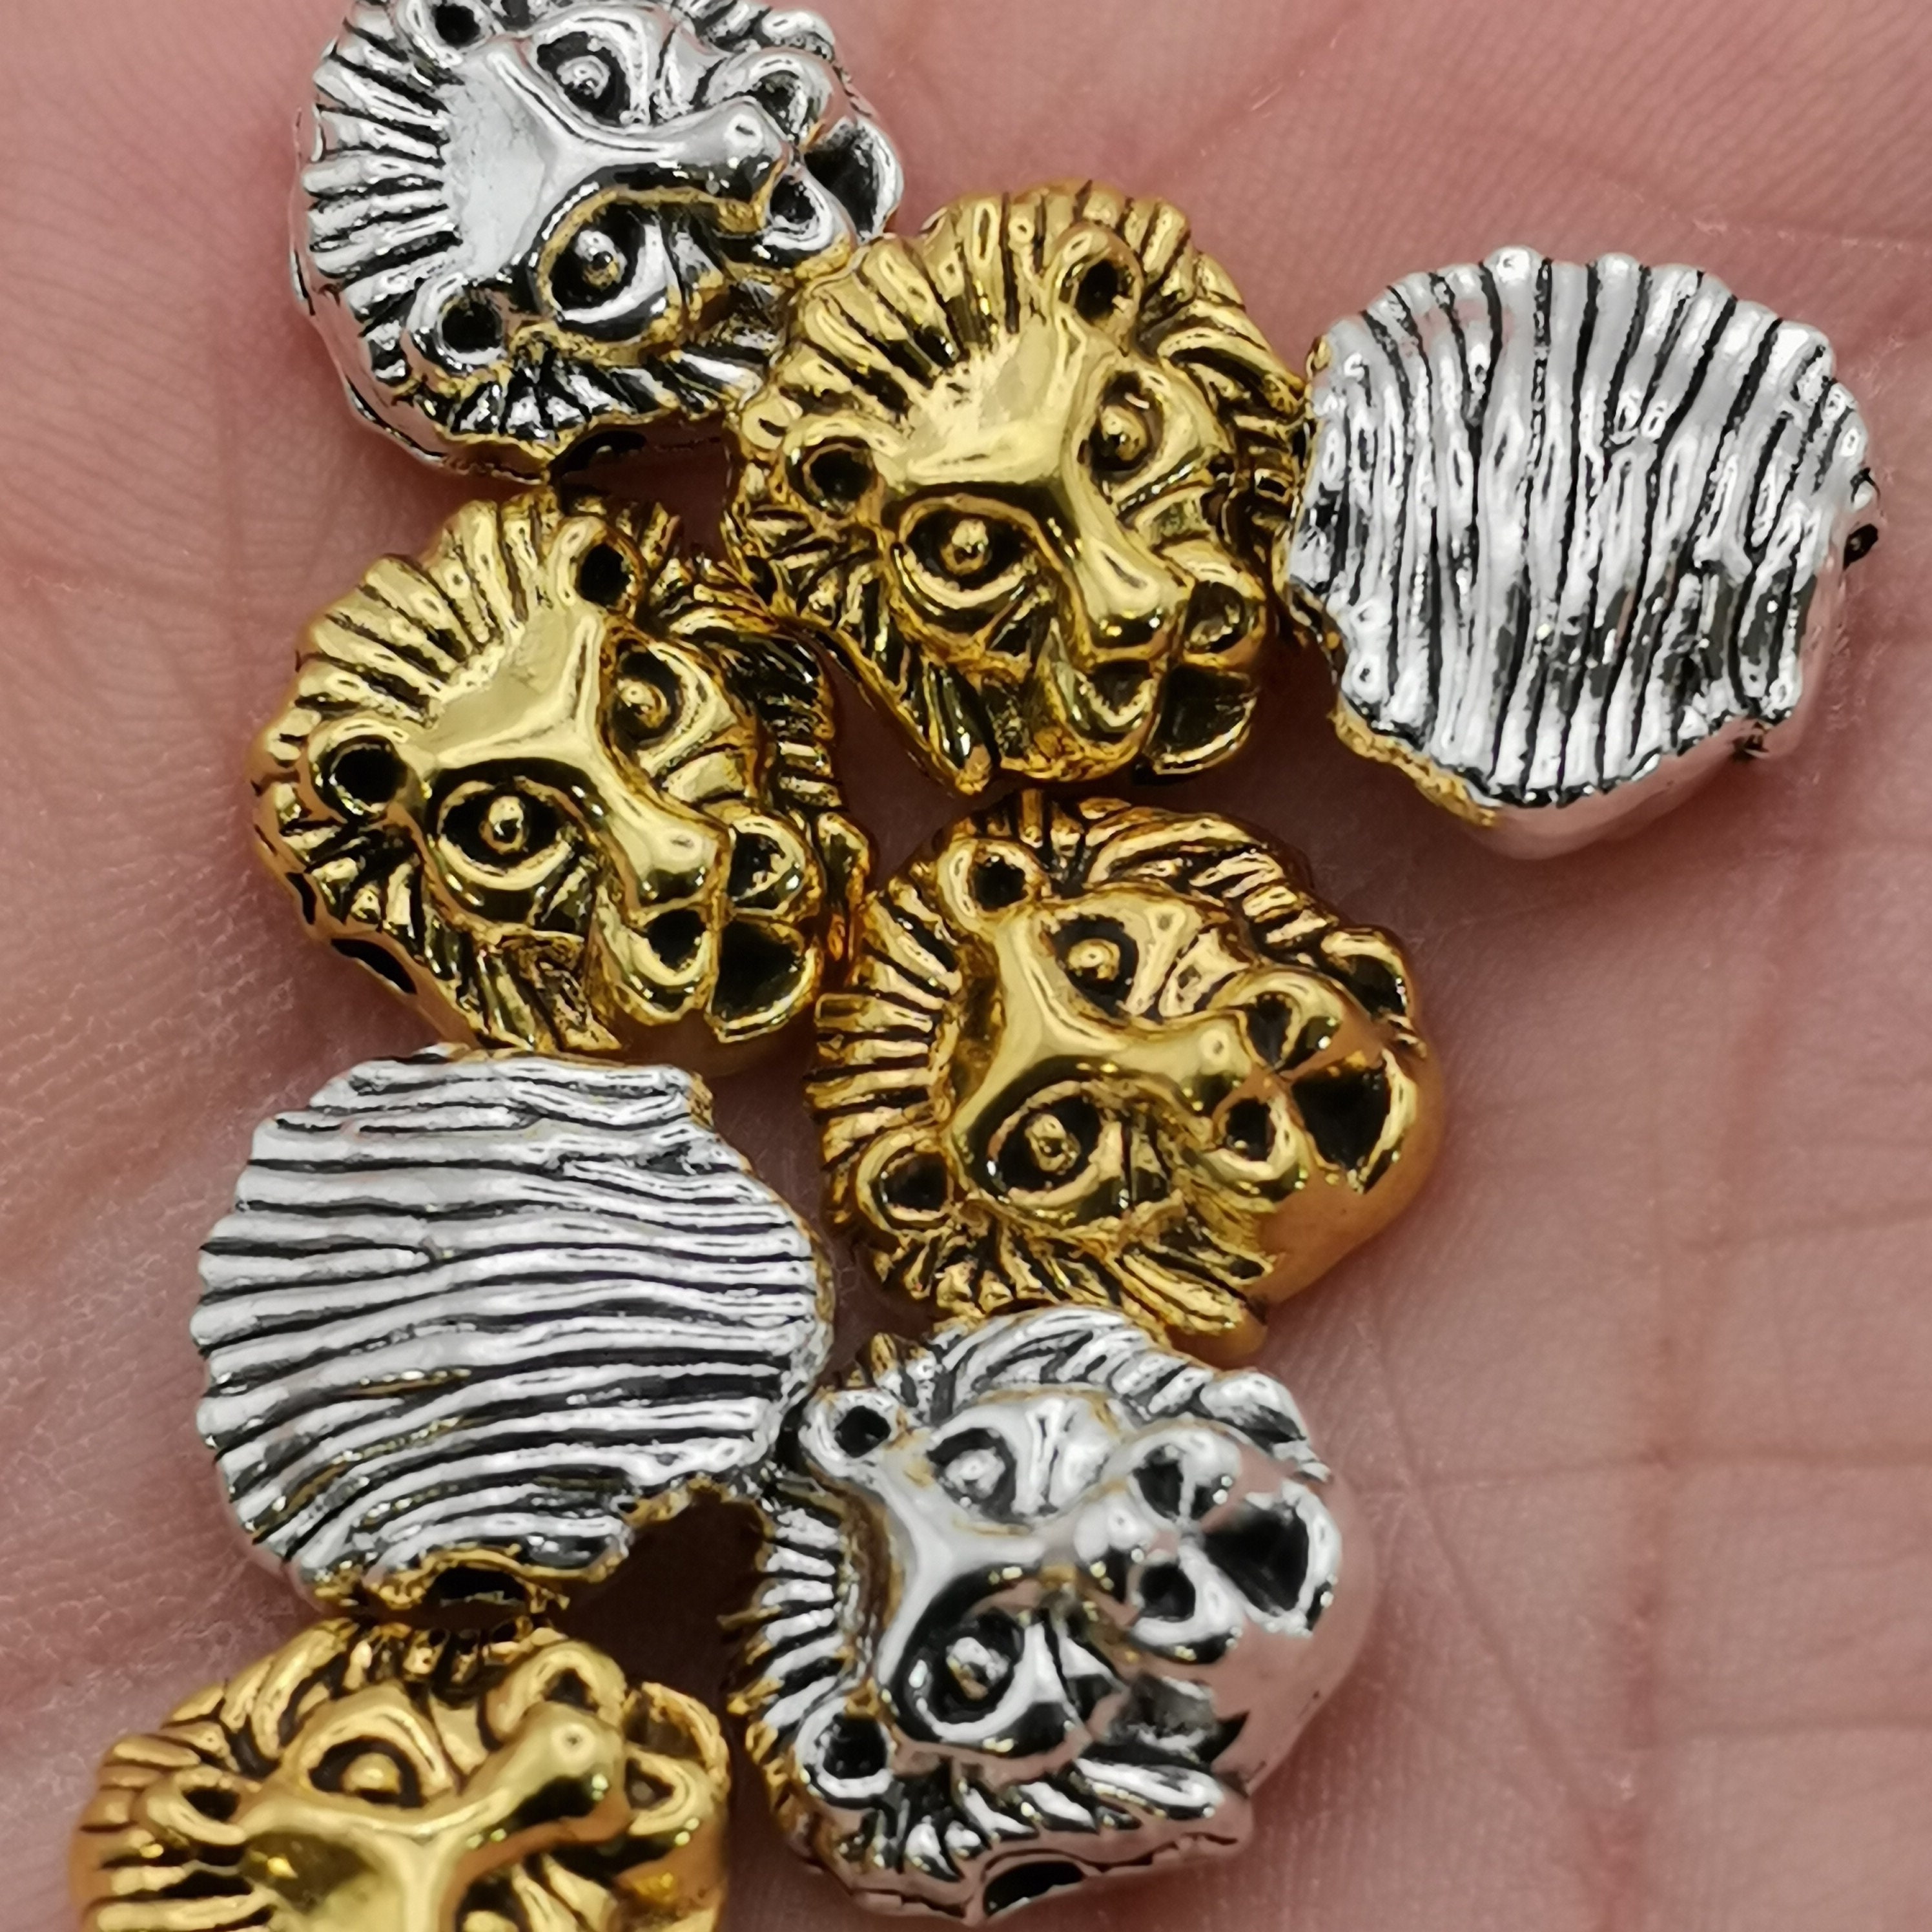 EXCEART 90 Pcs Alloy Small Hole Beads Tiger Head Beads Lion Beads Charms  Metal Charms Bead Jewelry Making Bead Spacers Bulk Ornaments Skull Beads